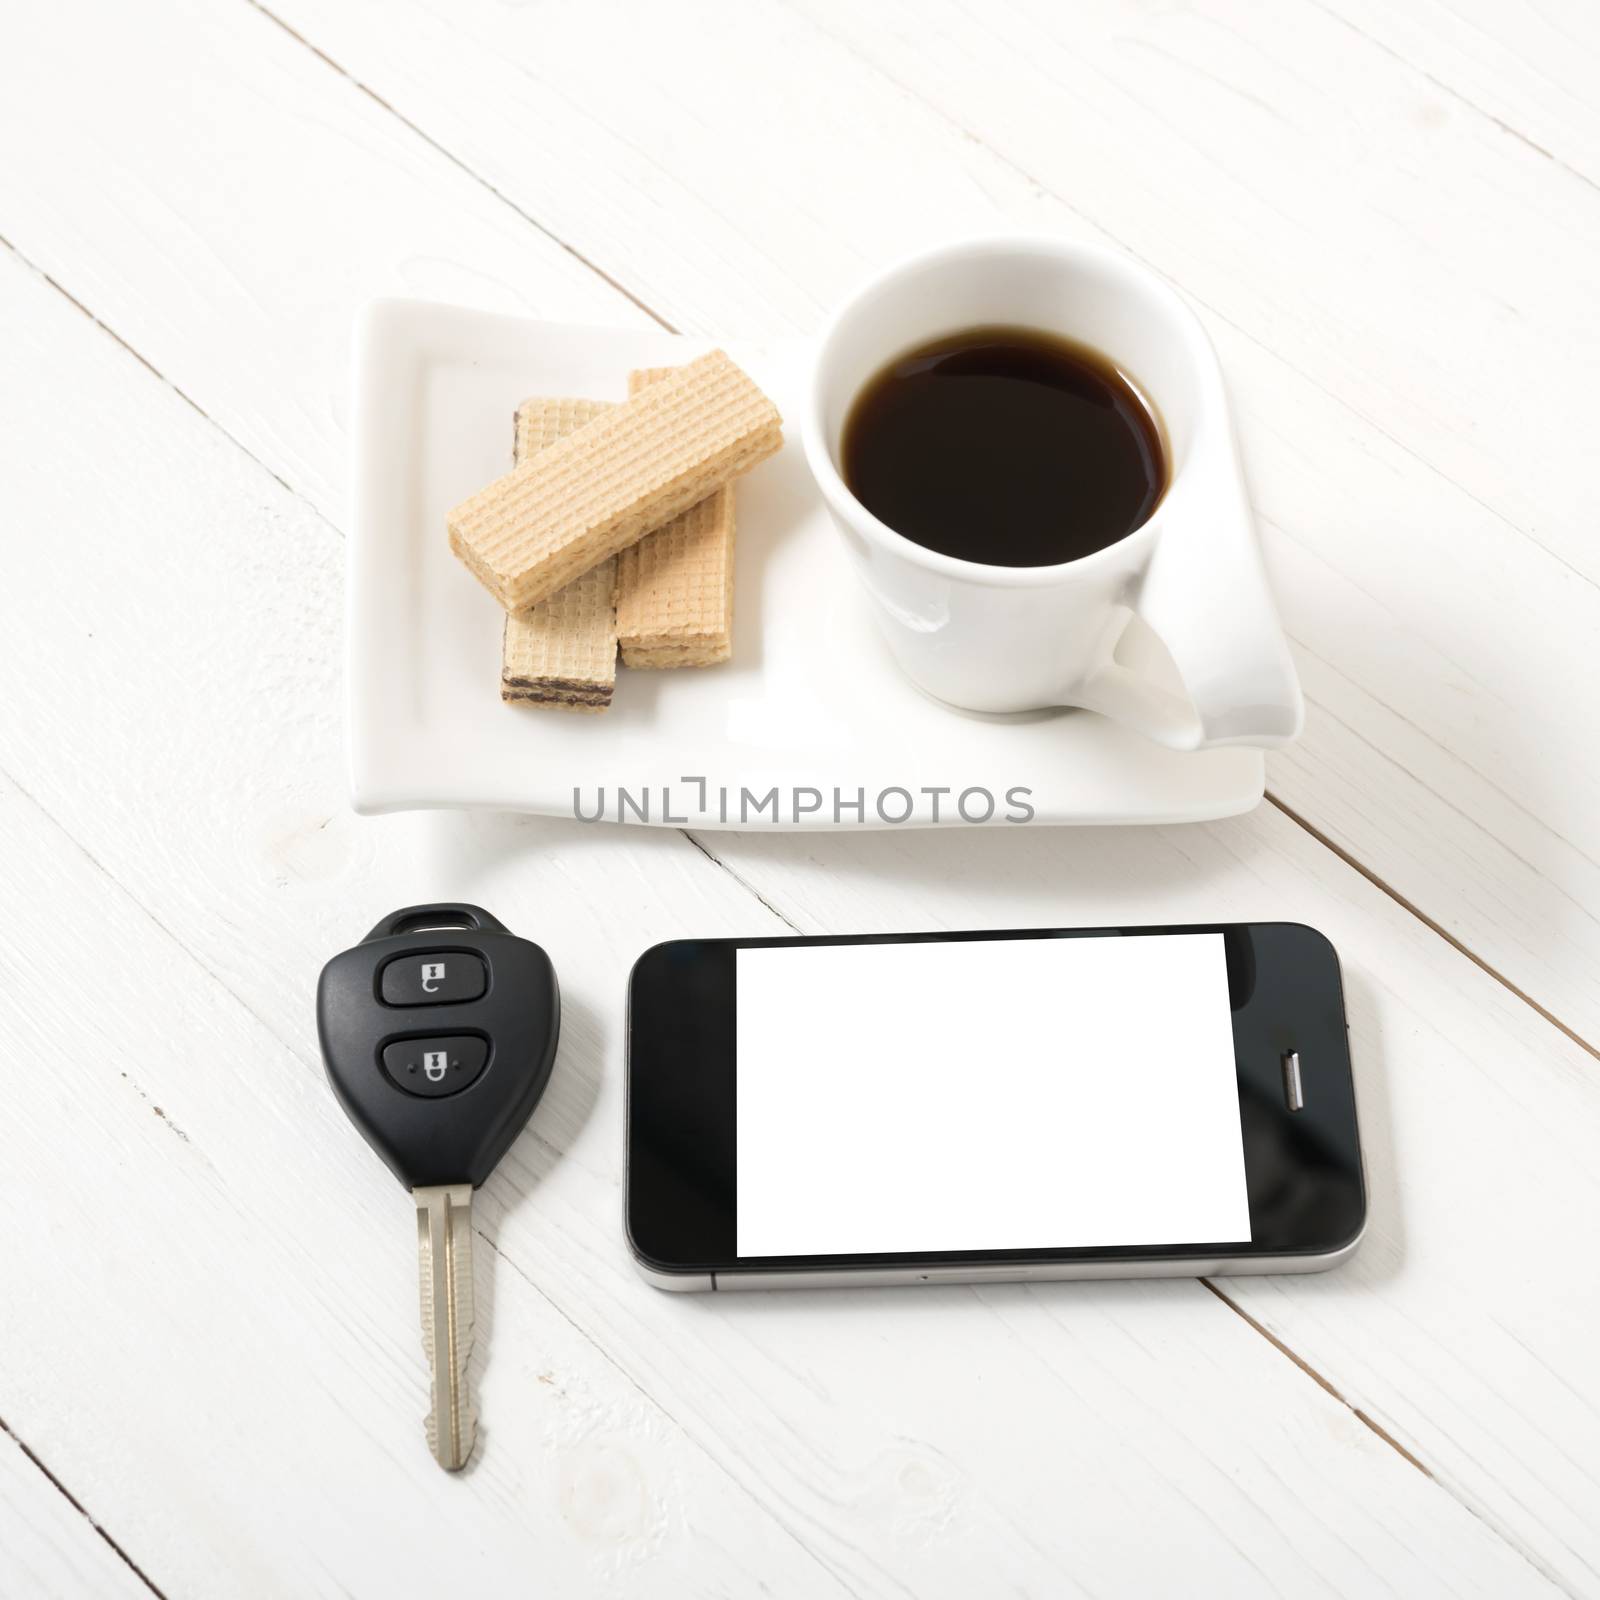 coffee cup with wafer,phone,car key on white wood background